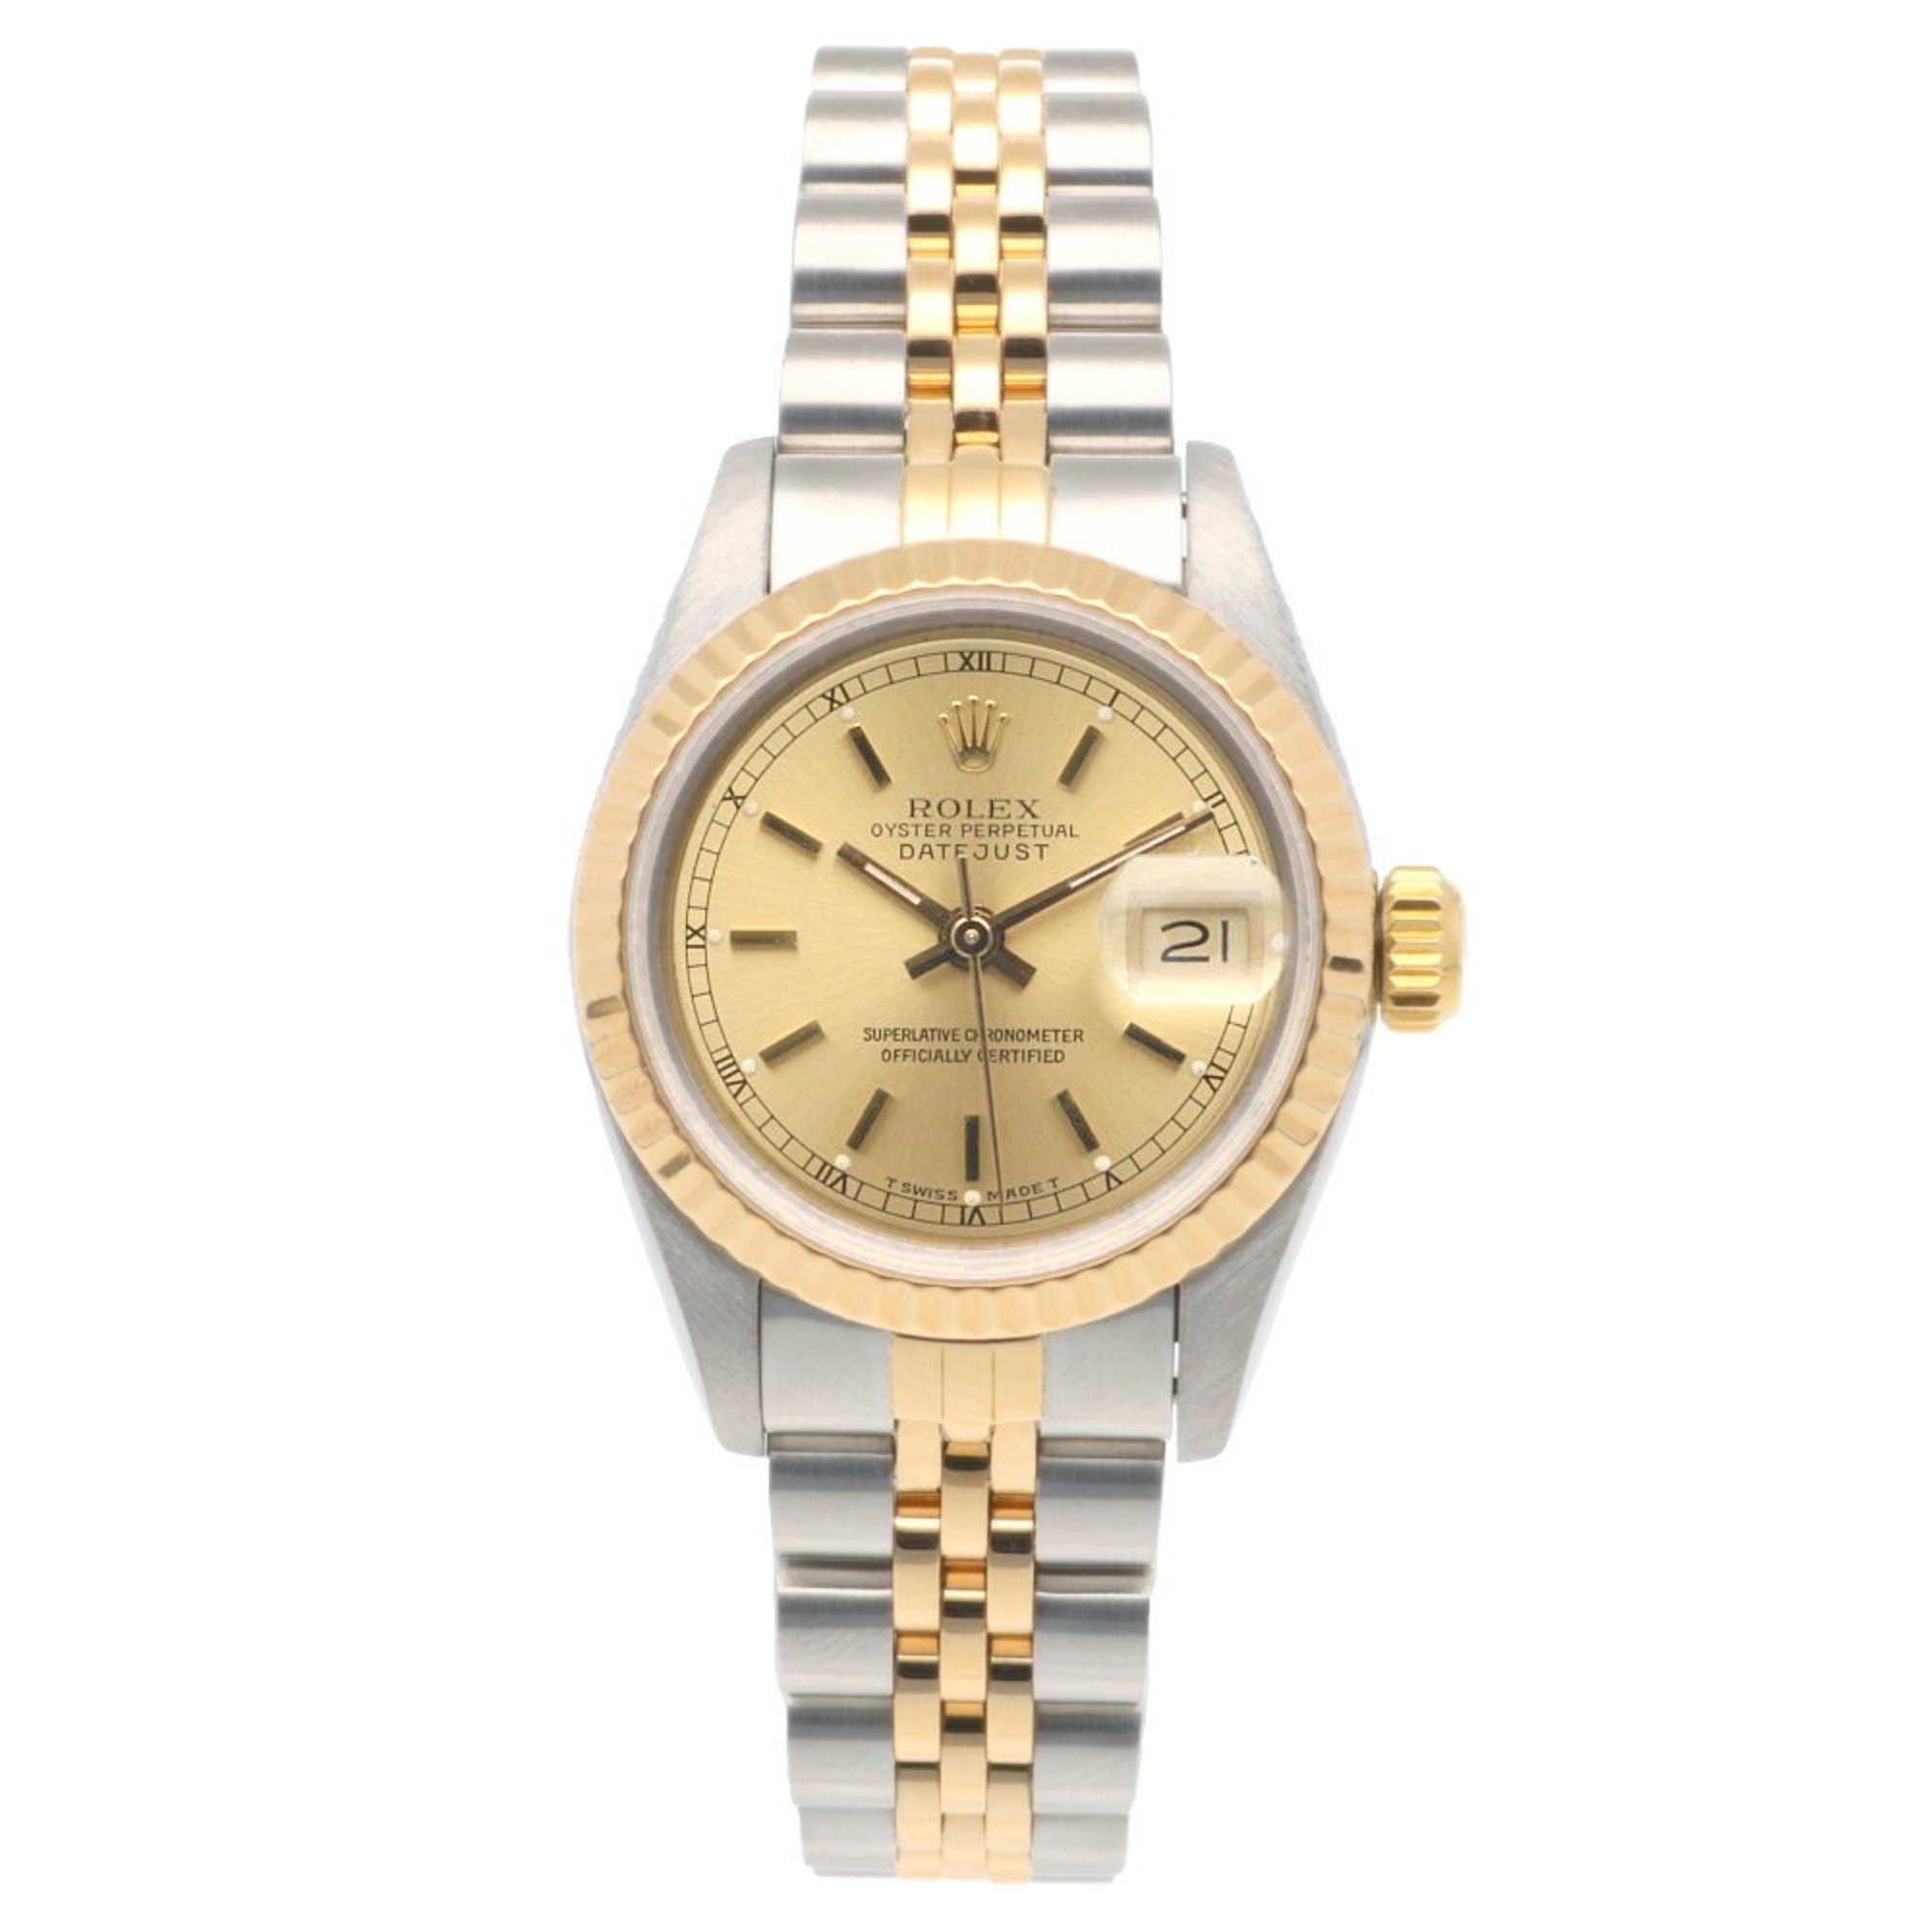 Rolex Datejust Oyster Perpetual Watch Stainless Steel 69173 Automatic Ladies ROLEX L Series 1989-1990 Model